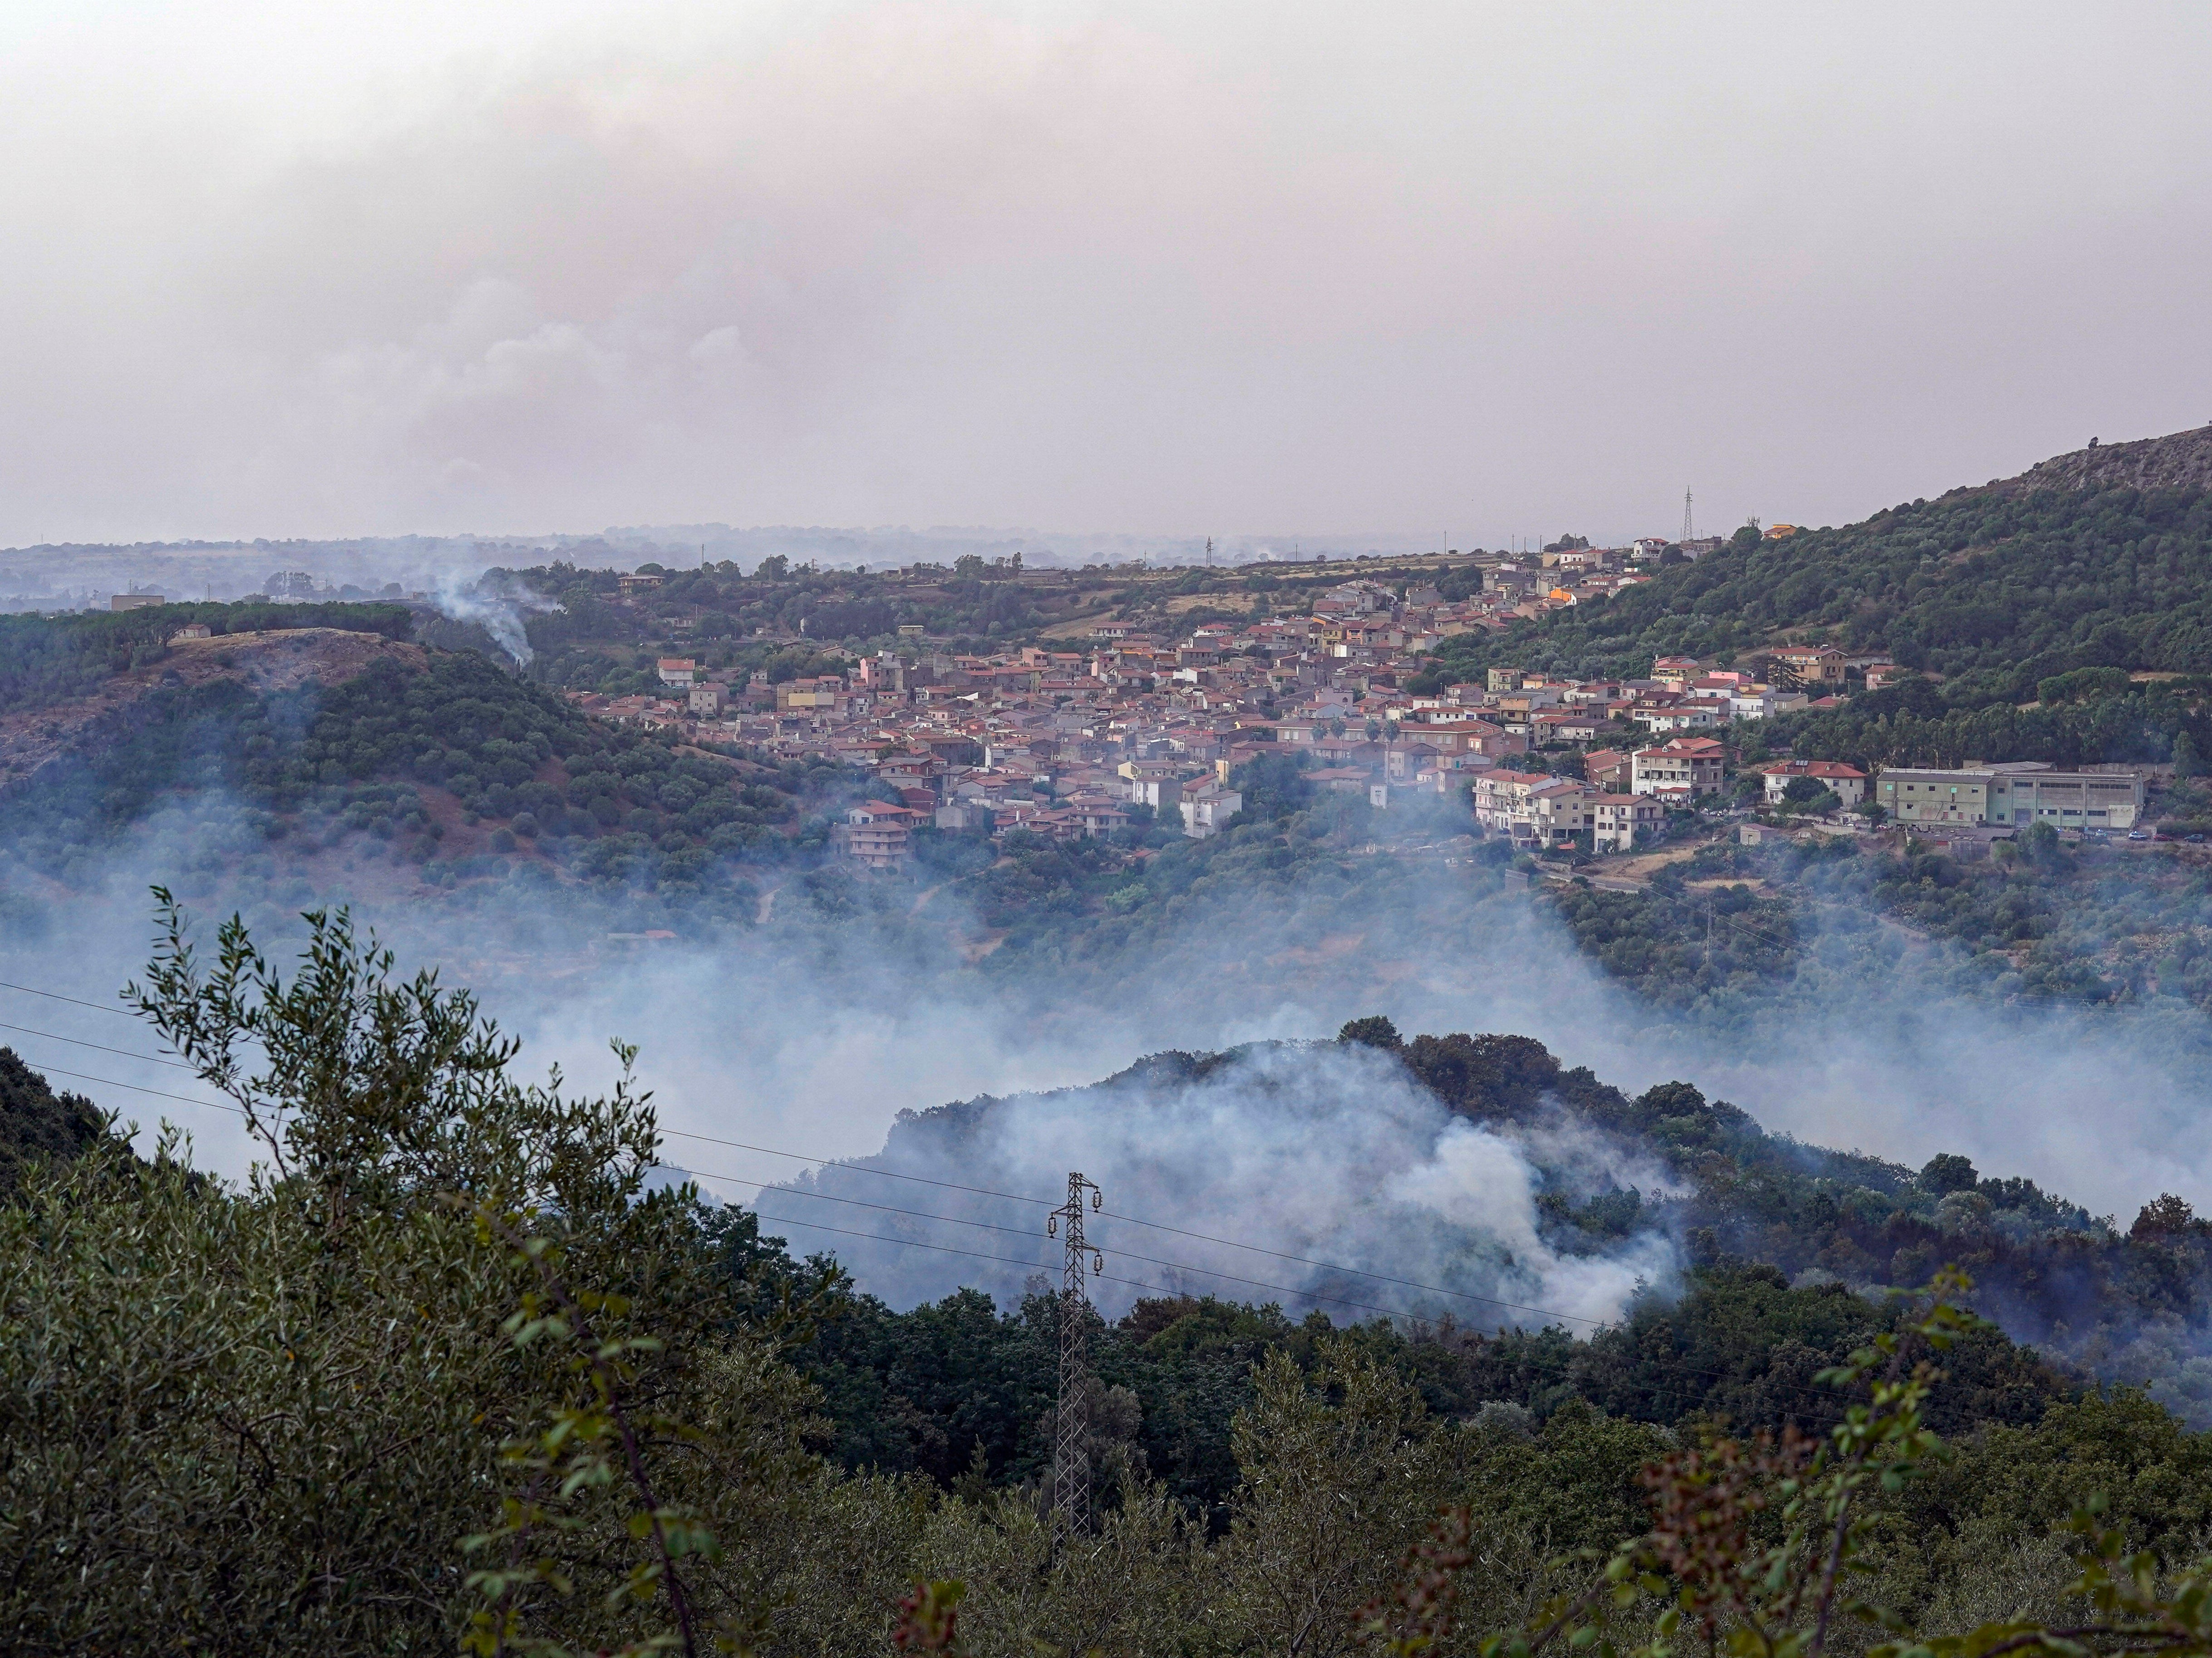 Animals have been killed and homes and businesses have been destroyed in Sardinia’s wildfires